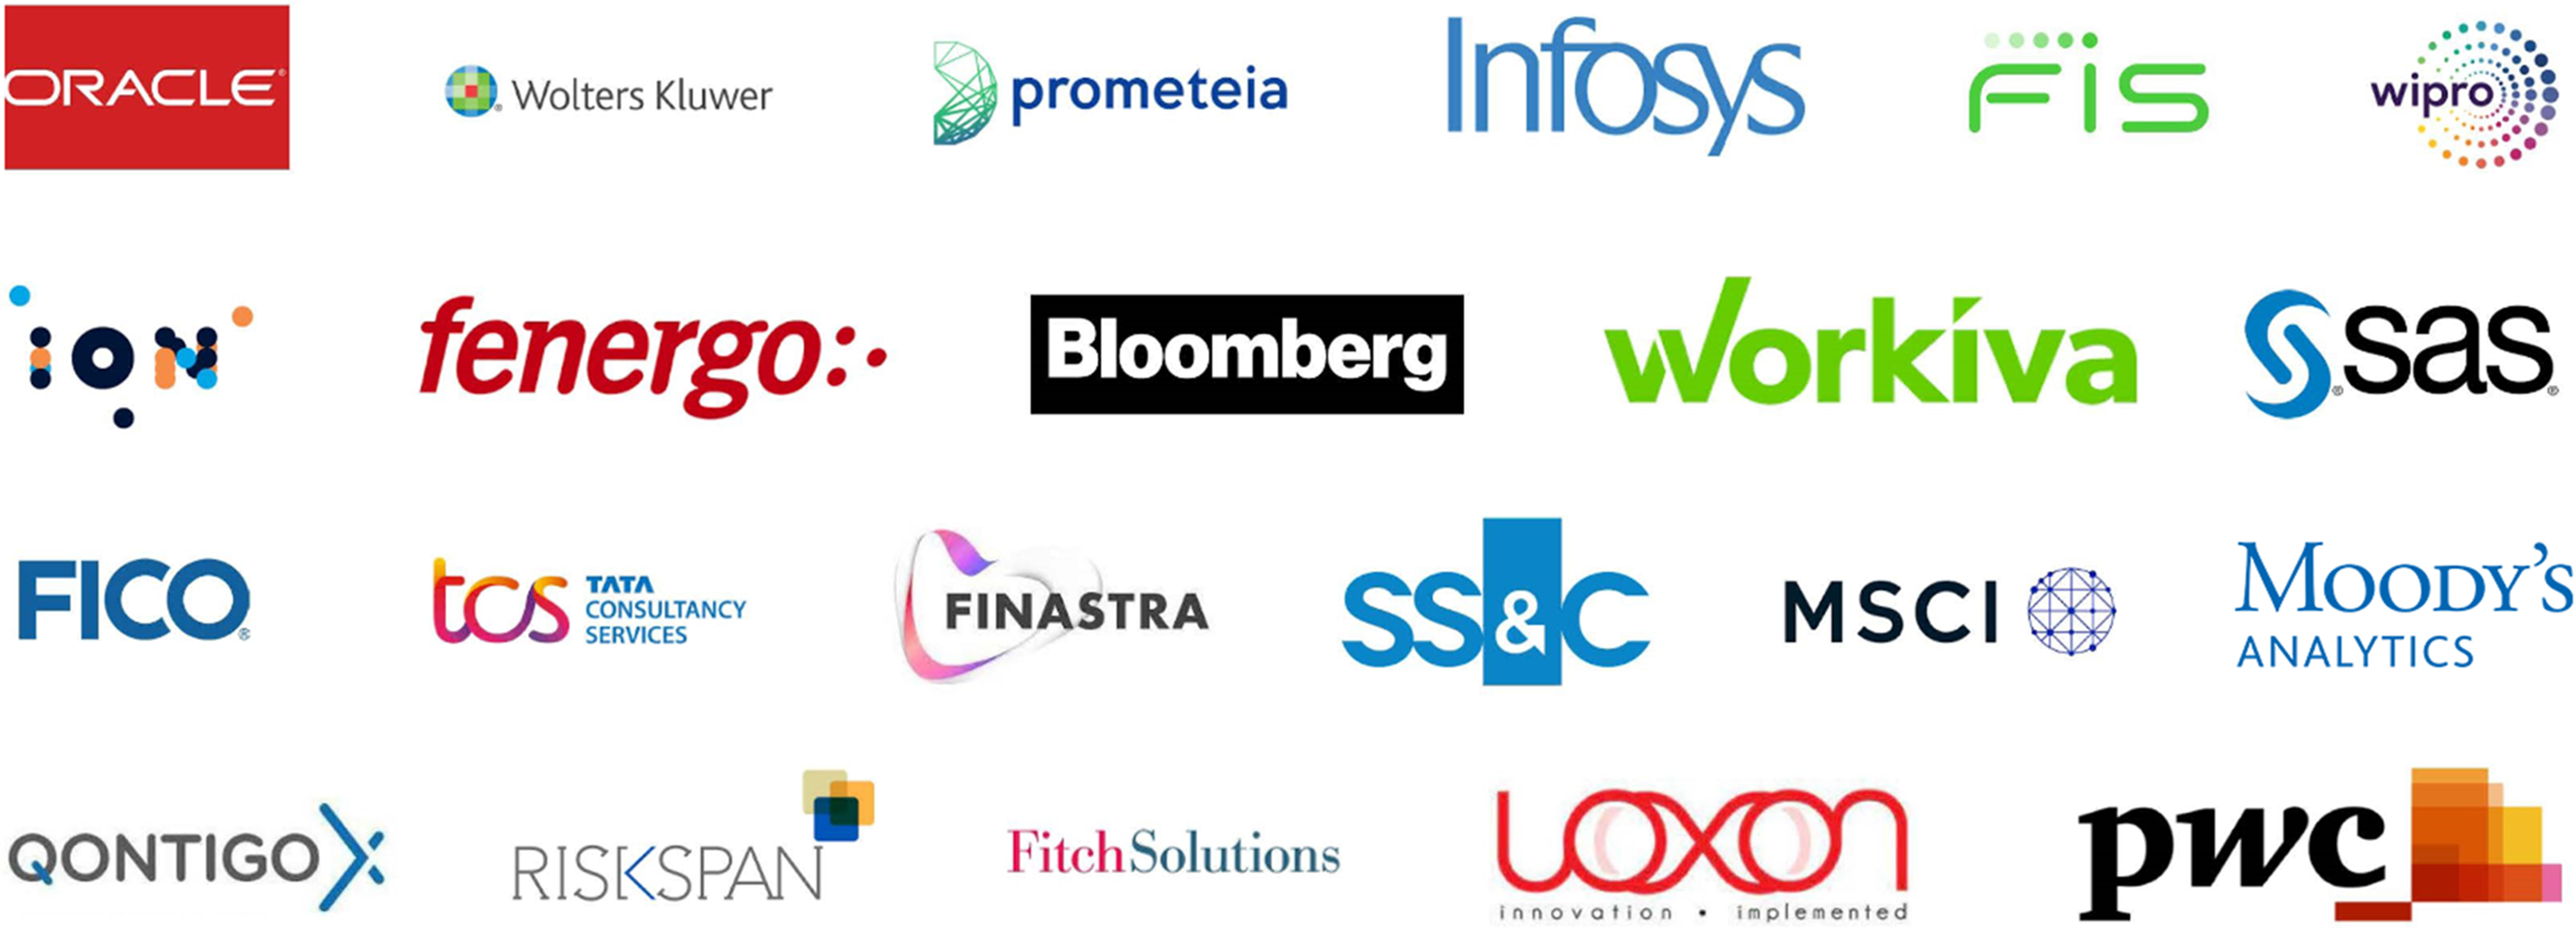 Chartis Research clients - selection of logo images for companies we've worked with: Oracle, Wolters Kluwer, prometeia, infosys, FIS, wipro, ion, fenergo, Bloomberg, Workiva, Sas, Fico, TCS, Finastra, ss&c, MSCI, Moody's Analytics, QONTIGO, riskspan, FitchSolutions, Loxon, PWC